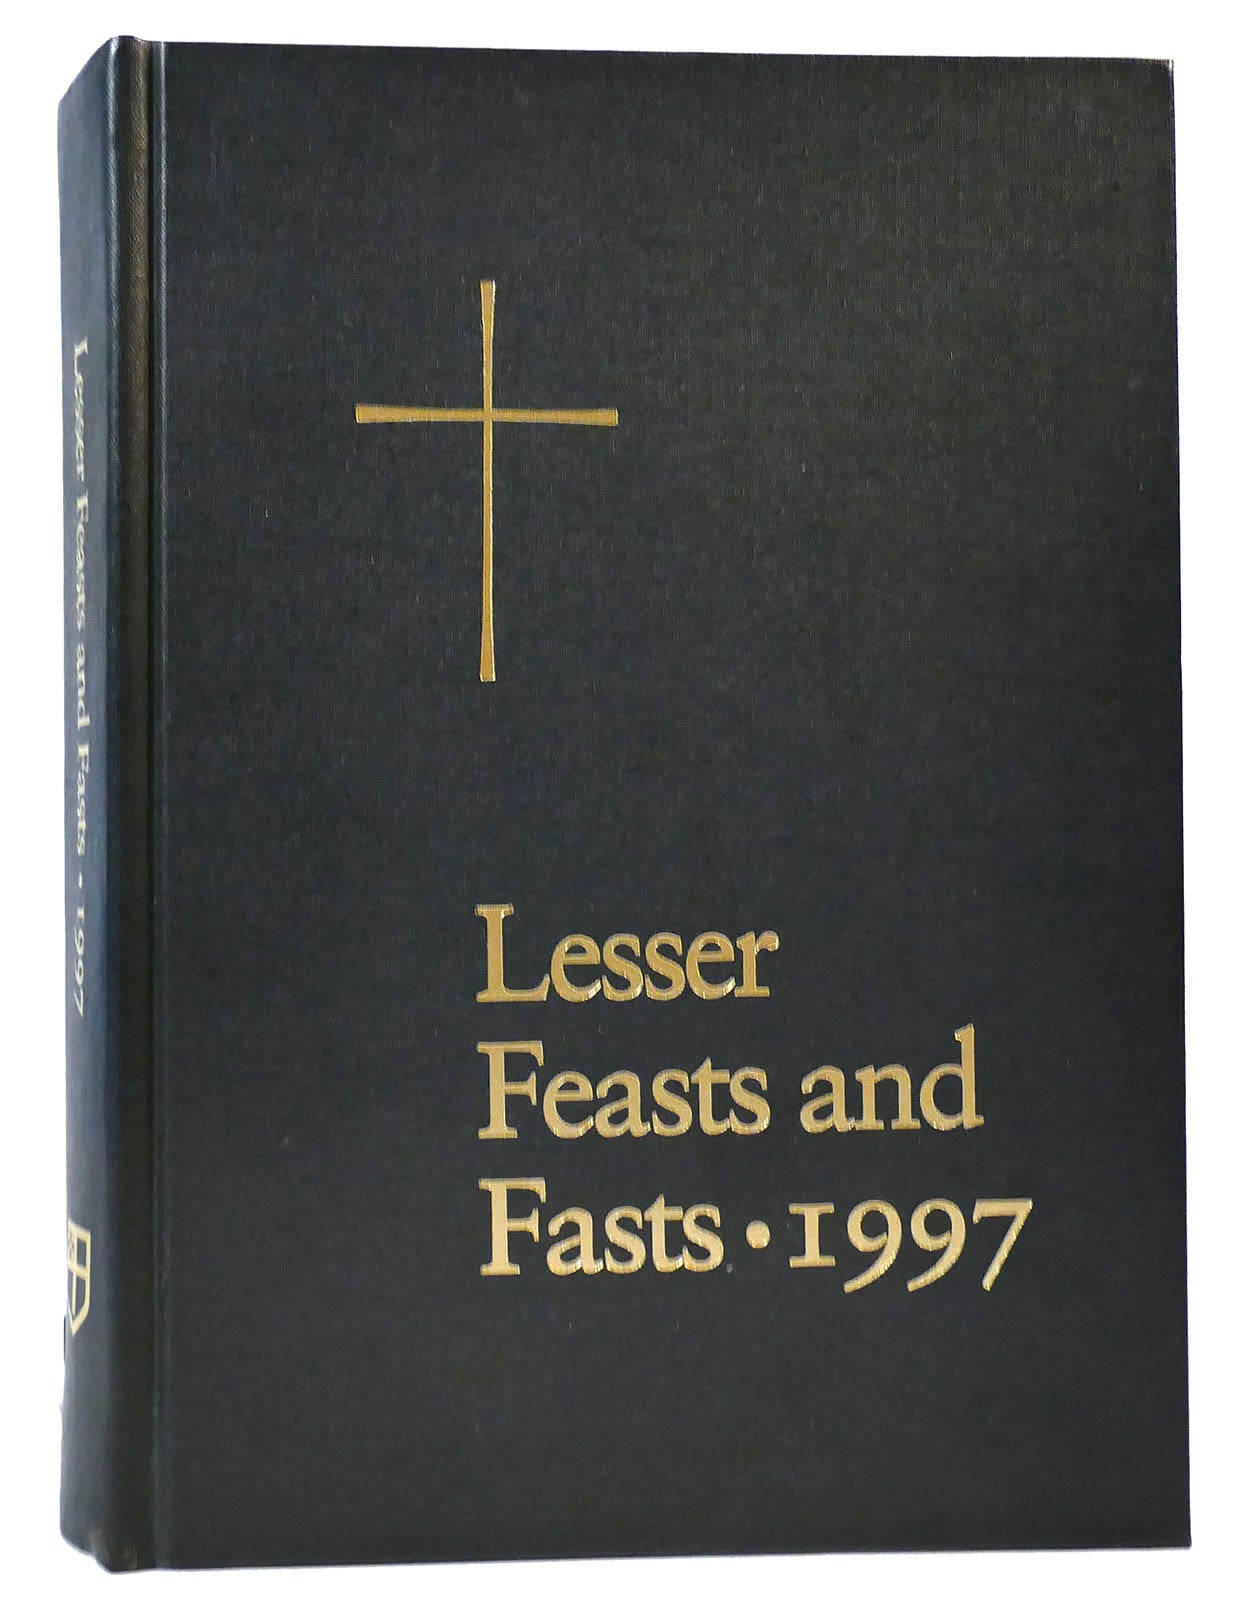 THE PROPER FOR THE LESSER FEASTS AND FASTS 1997 First Edition; First